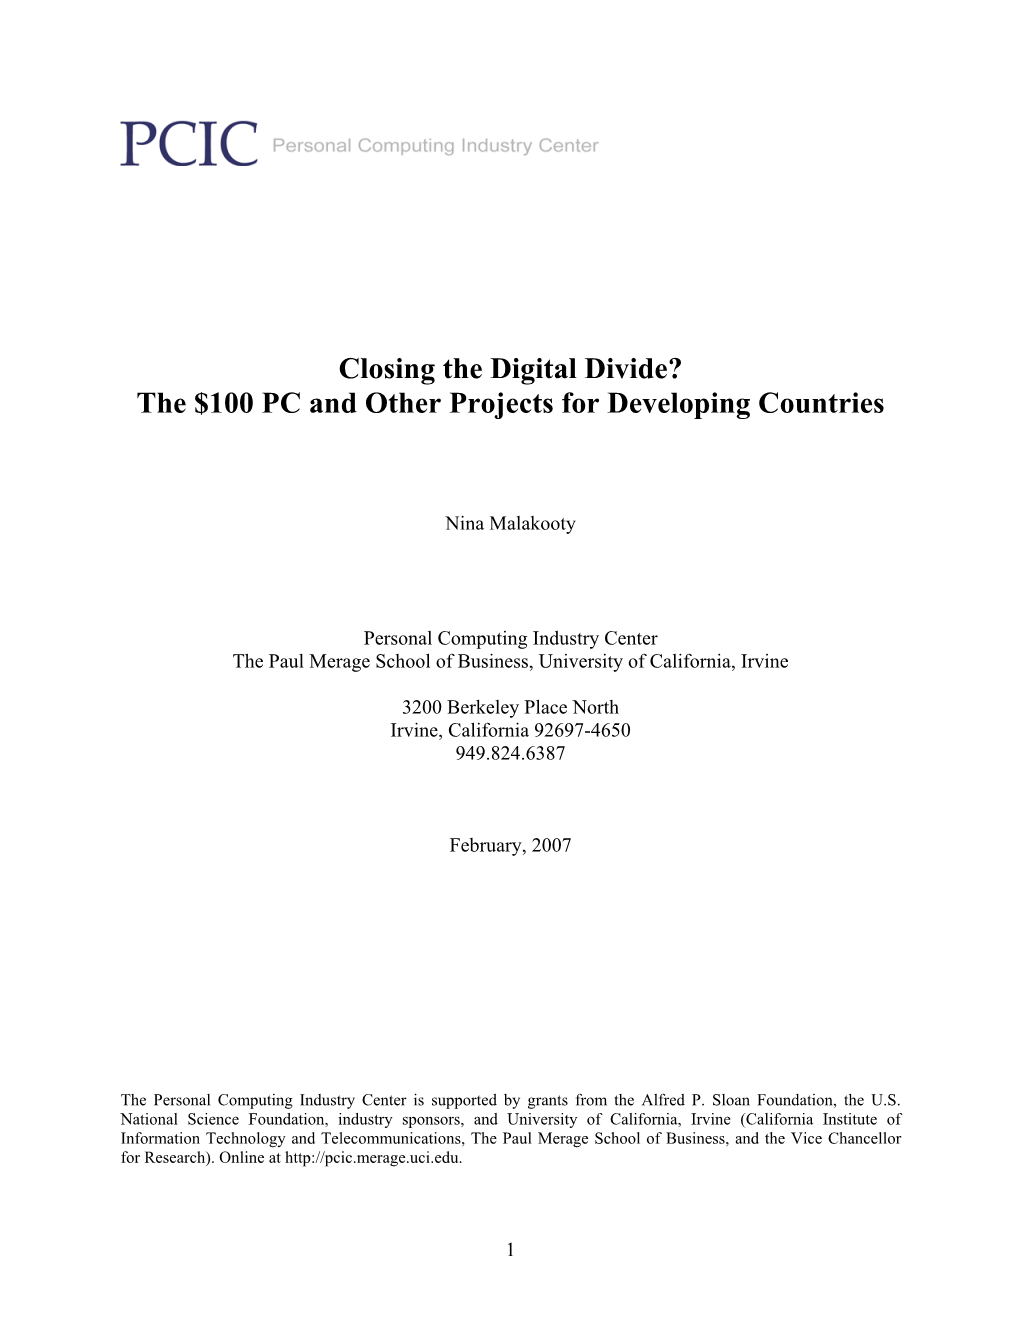 Closing the Digital Divide? the $100 PC and Other Projects for Developing Countries